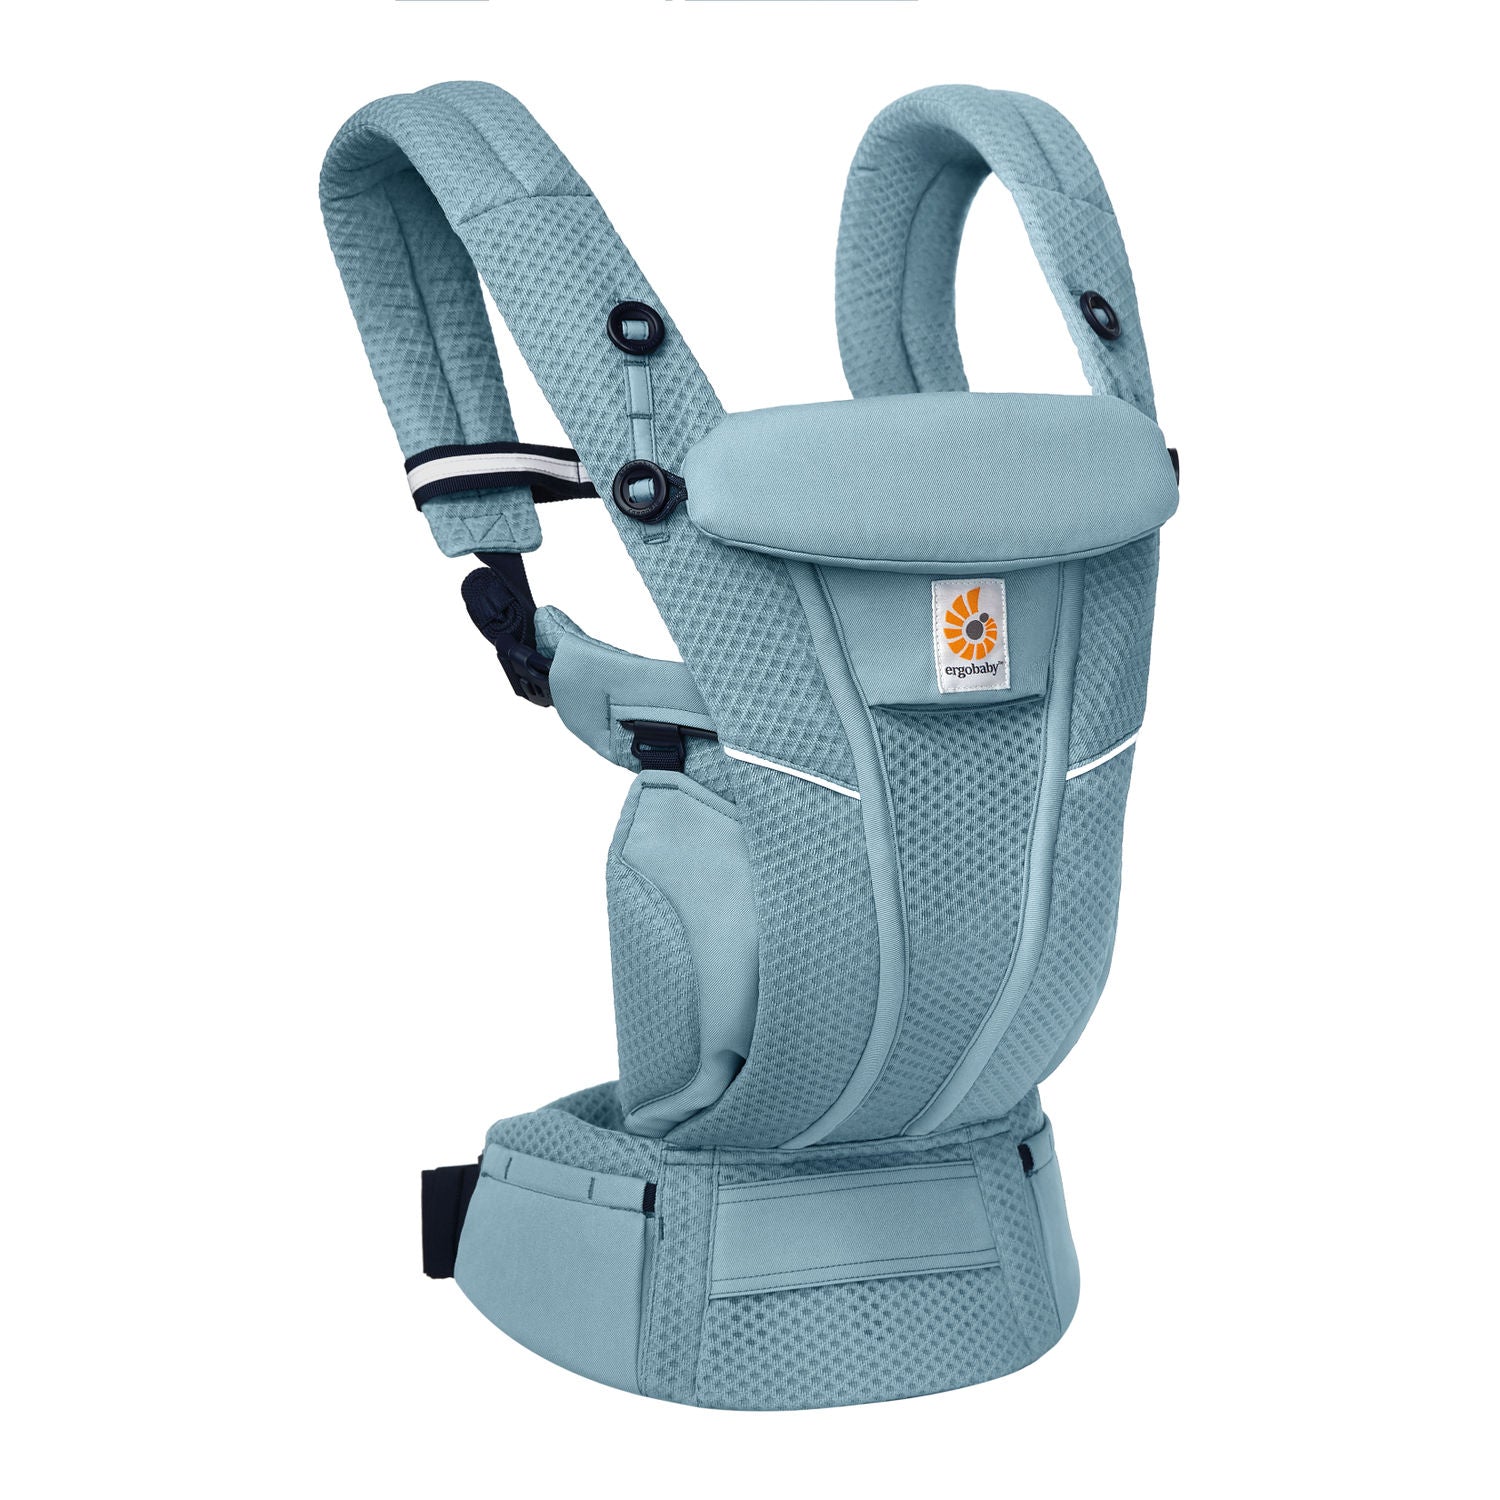 Buy the Ergobaby Omni 360 Heritage Blue from Sling Spot!